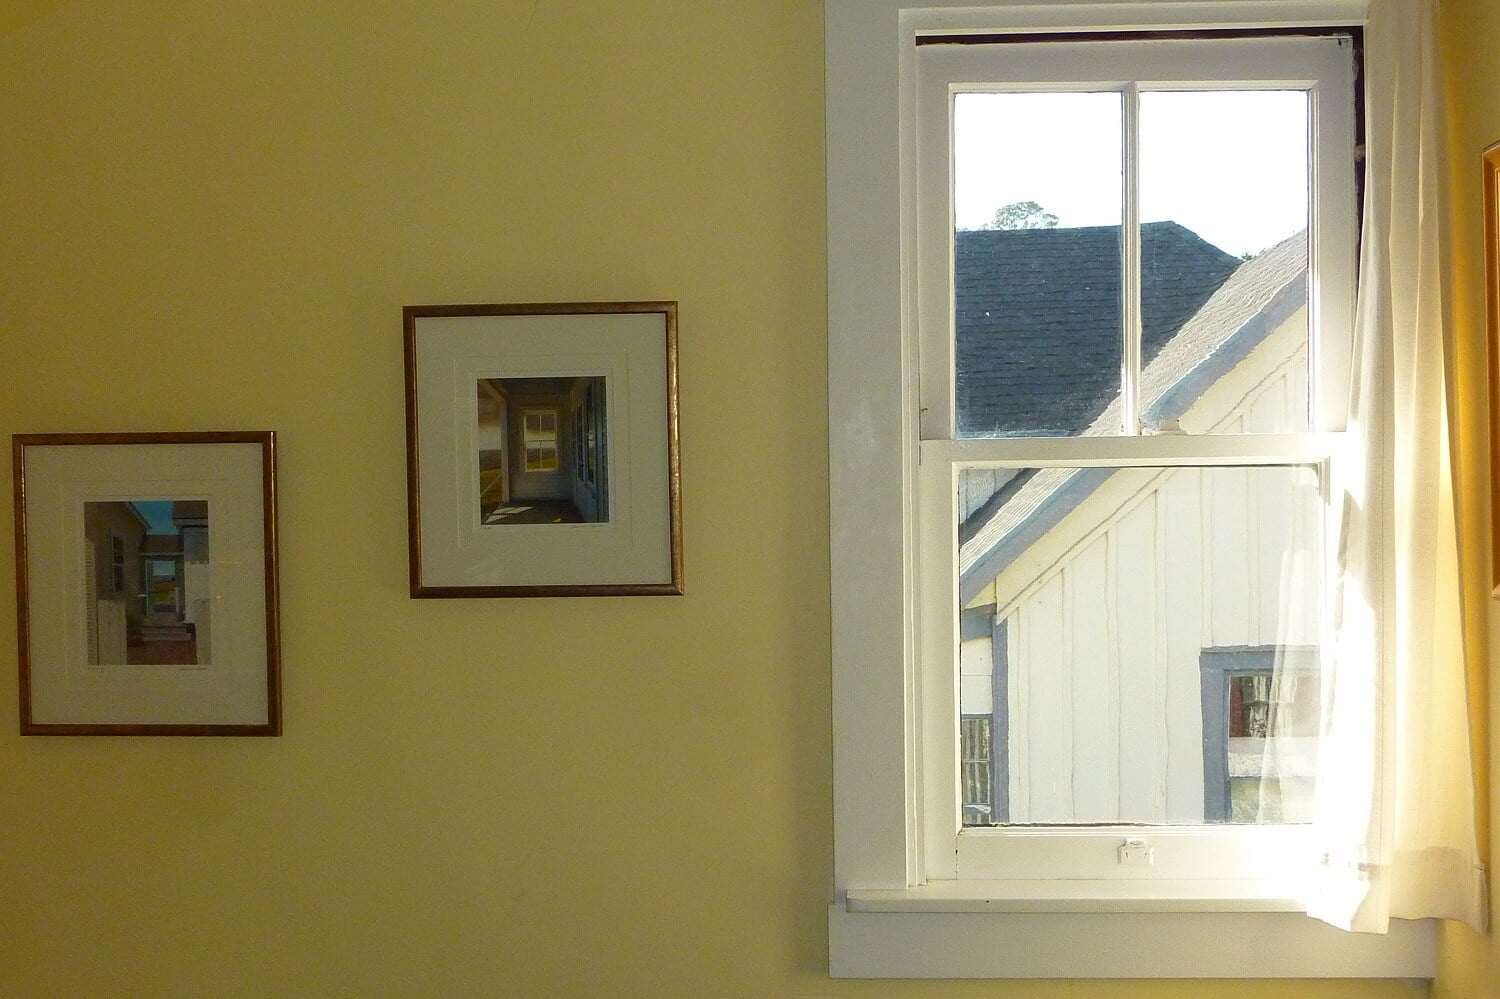 Aloft room west window with two framed photos